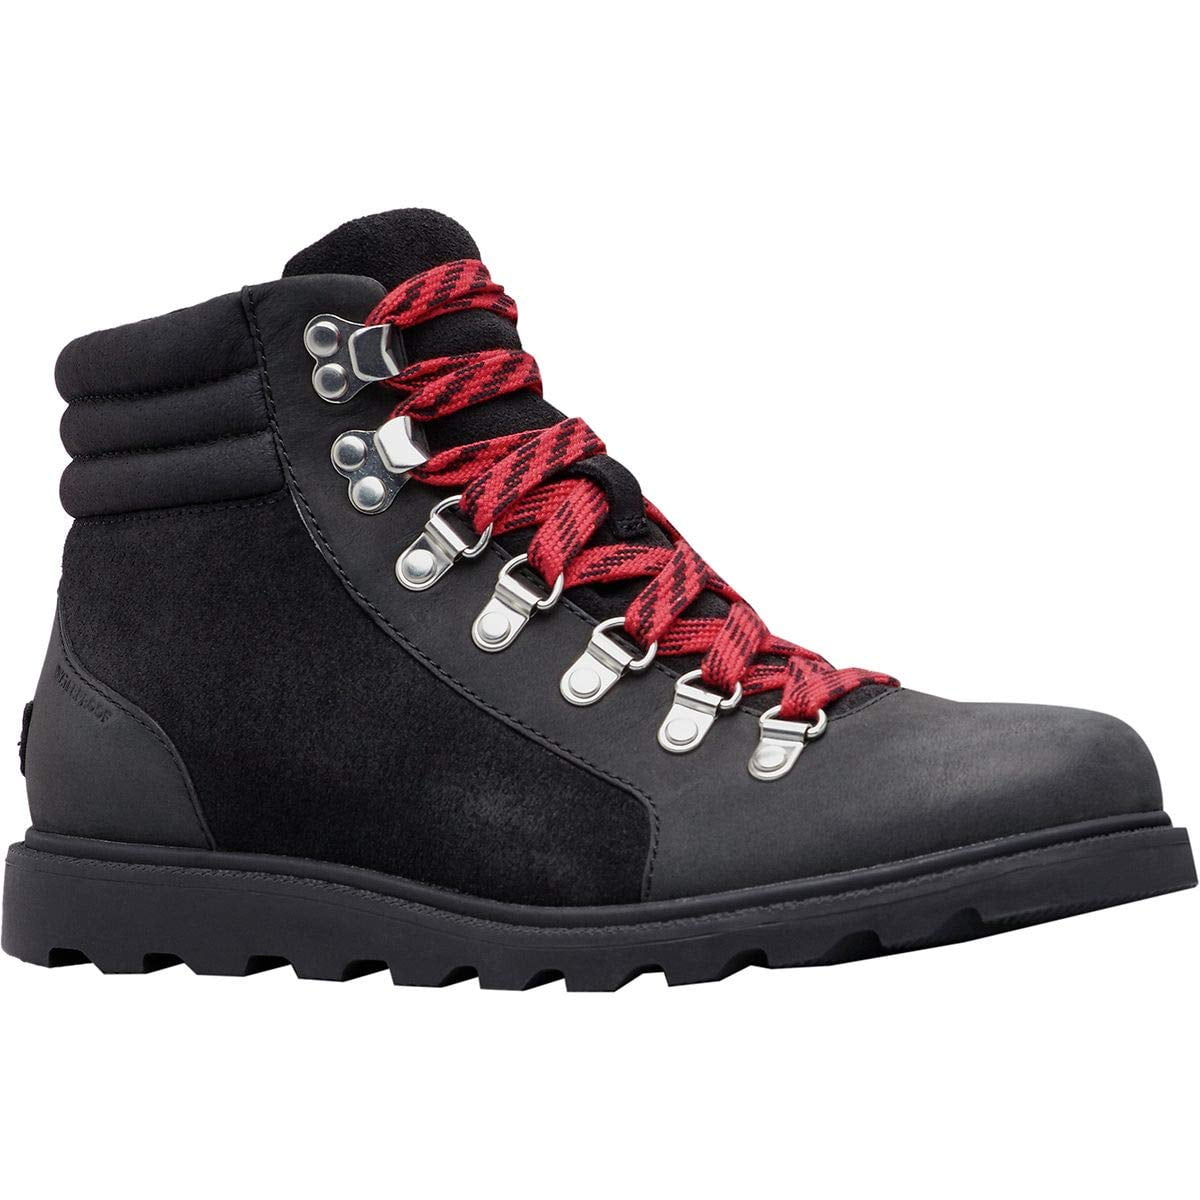 ainsley conquest boot